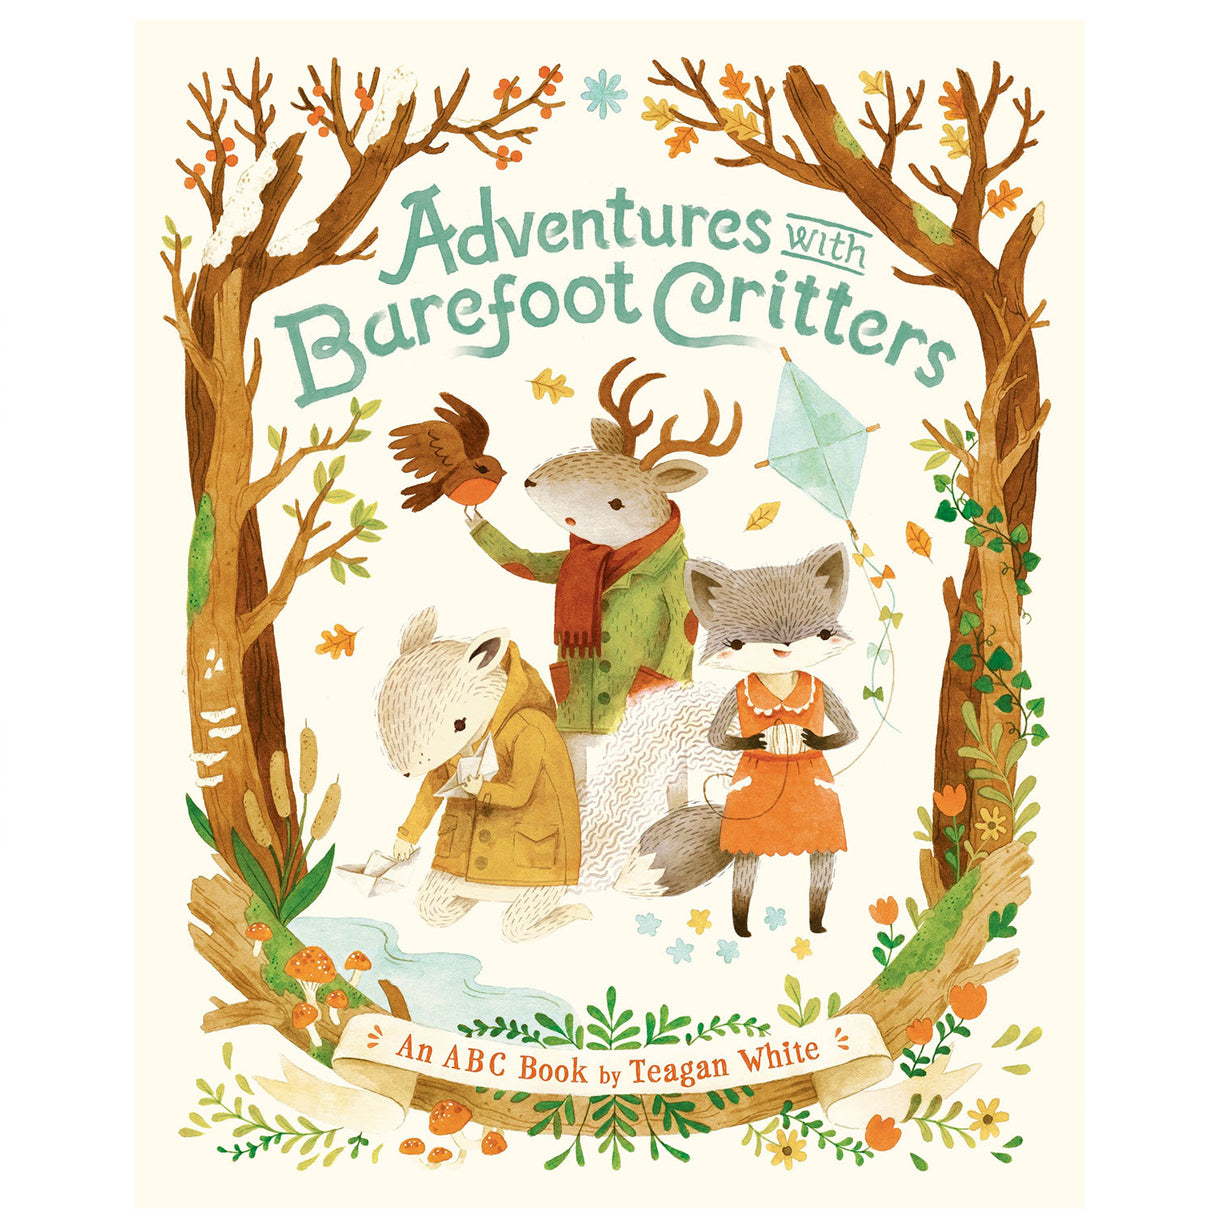 Adventures With Barefoot Critters ABC